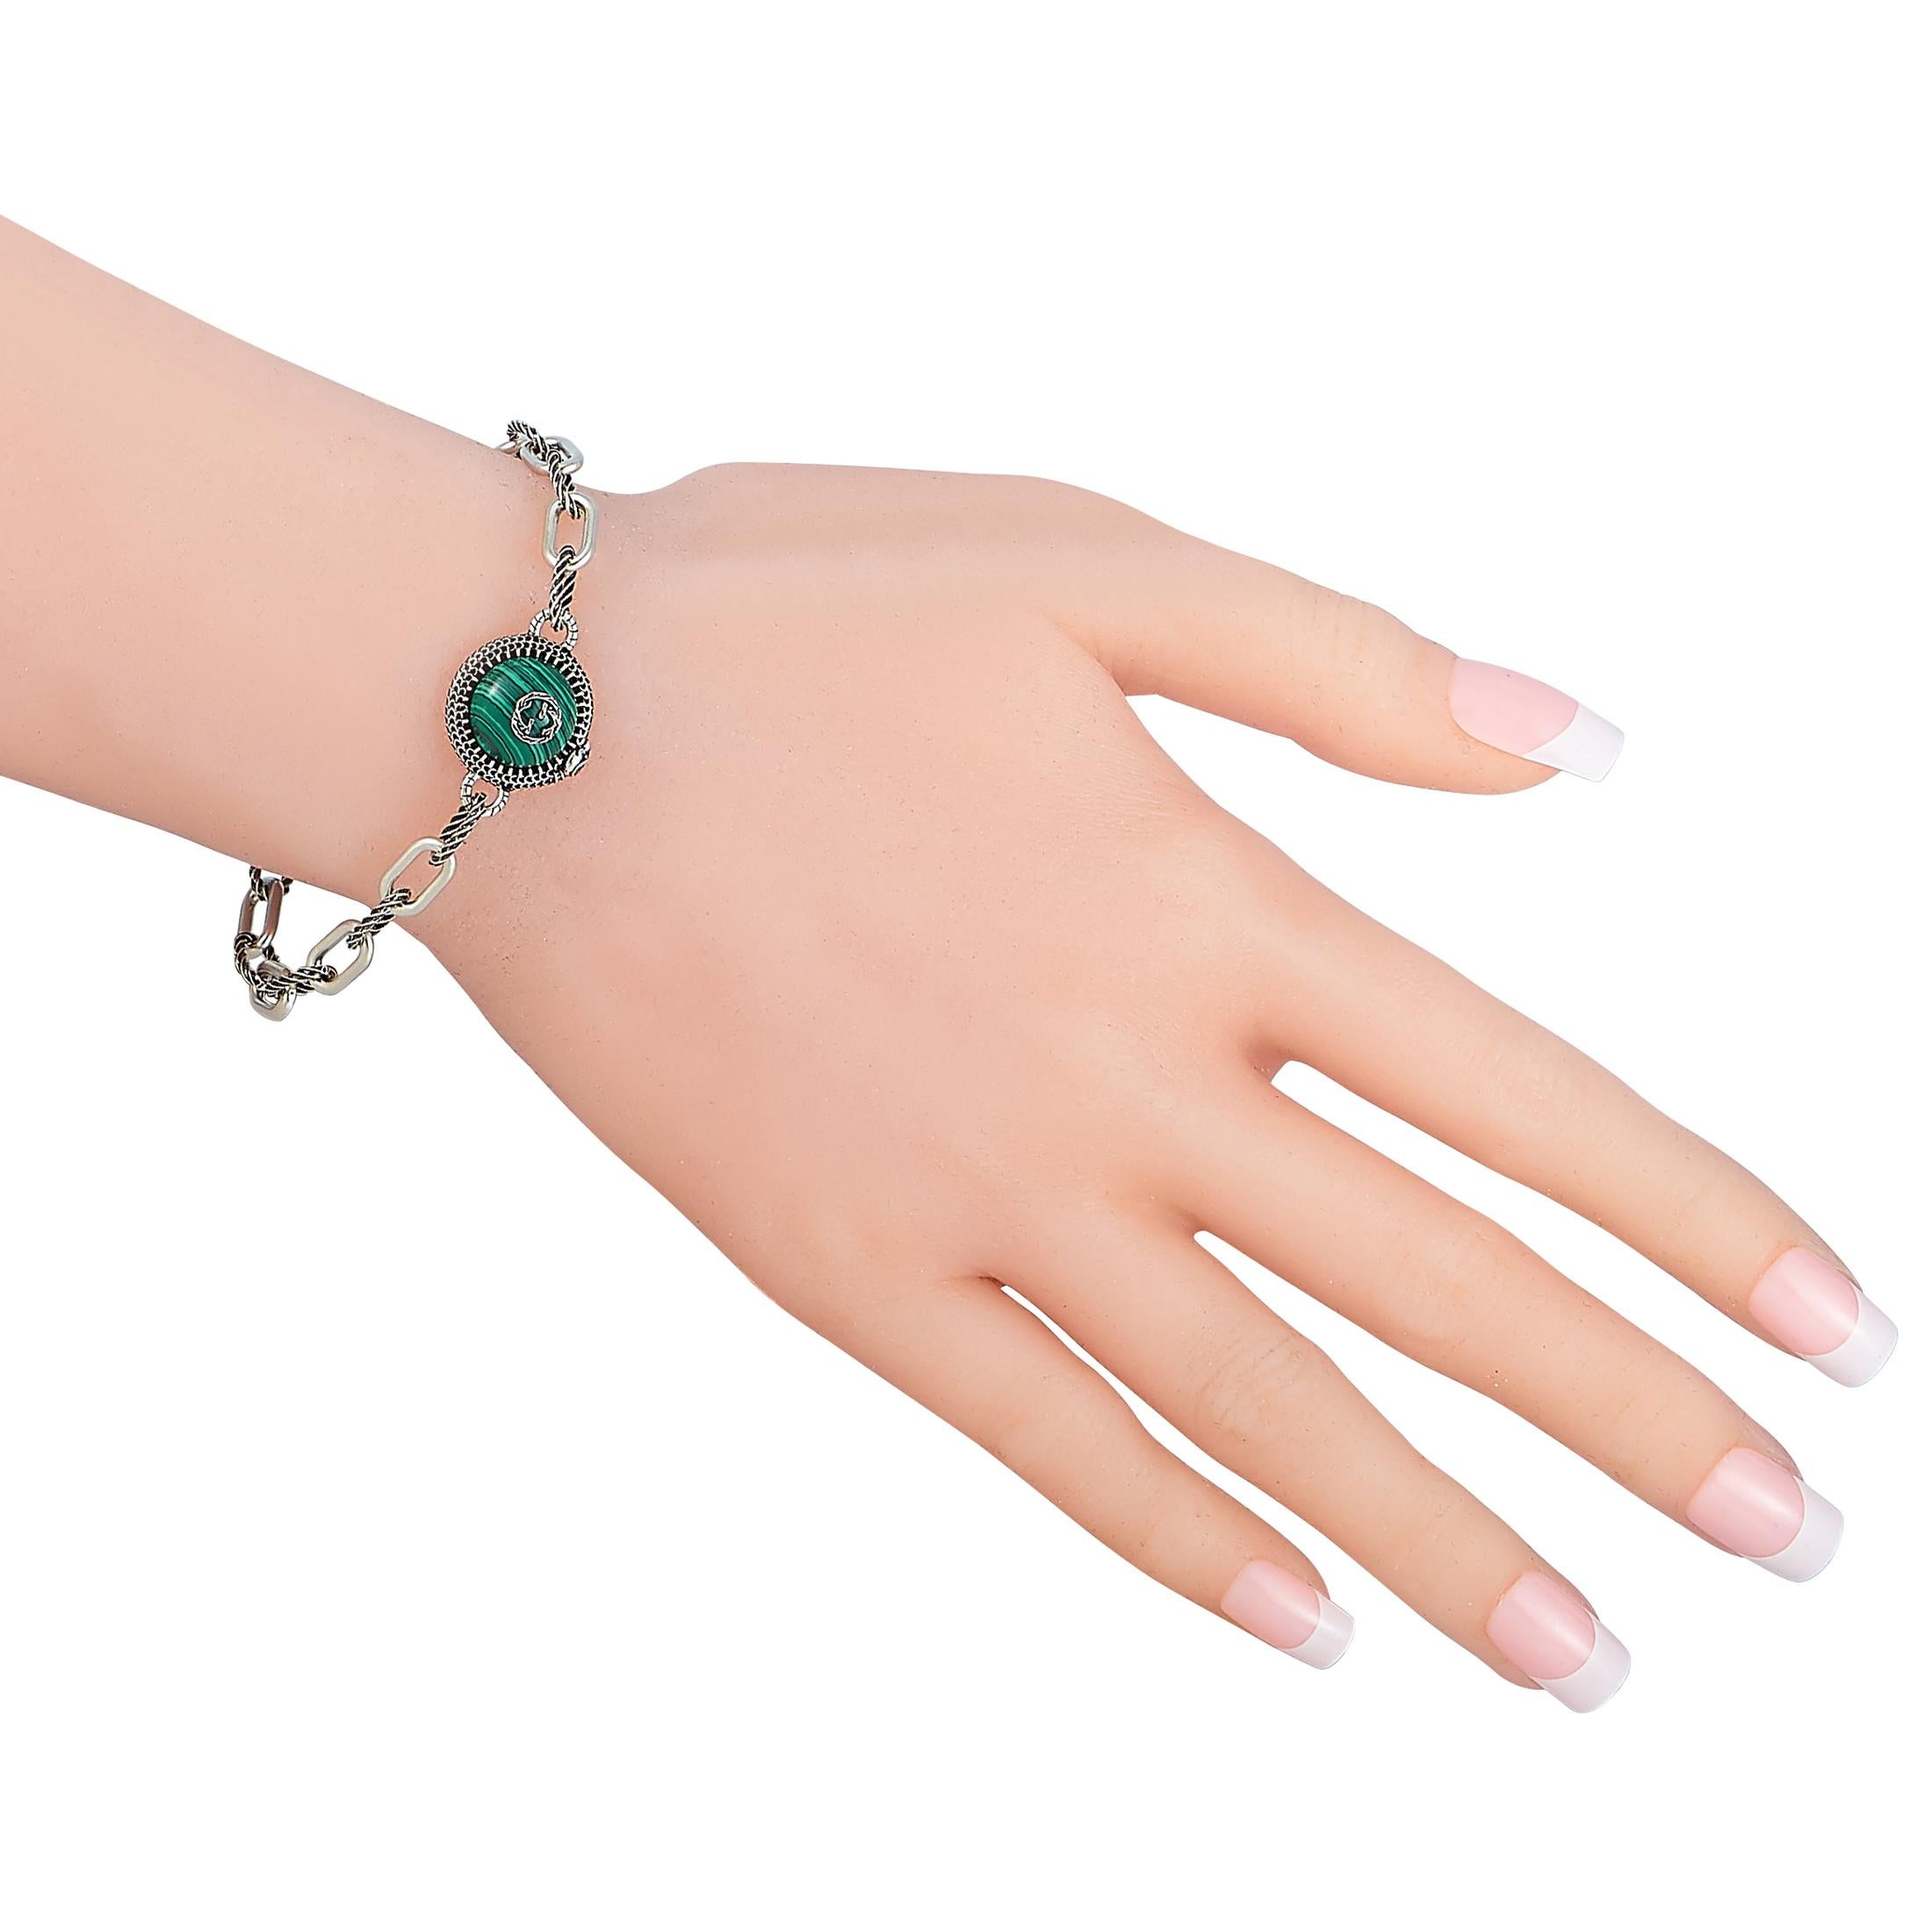 The Gucci “Garden” bracelet is made of sterling silver and embellished with malachite. The bracelet weighs 13.2 grams and measures 7.50” in length.

This jewelry piece is offered in brand new condition and includes the manufacturer’s box and papers.